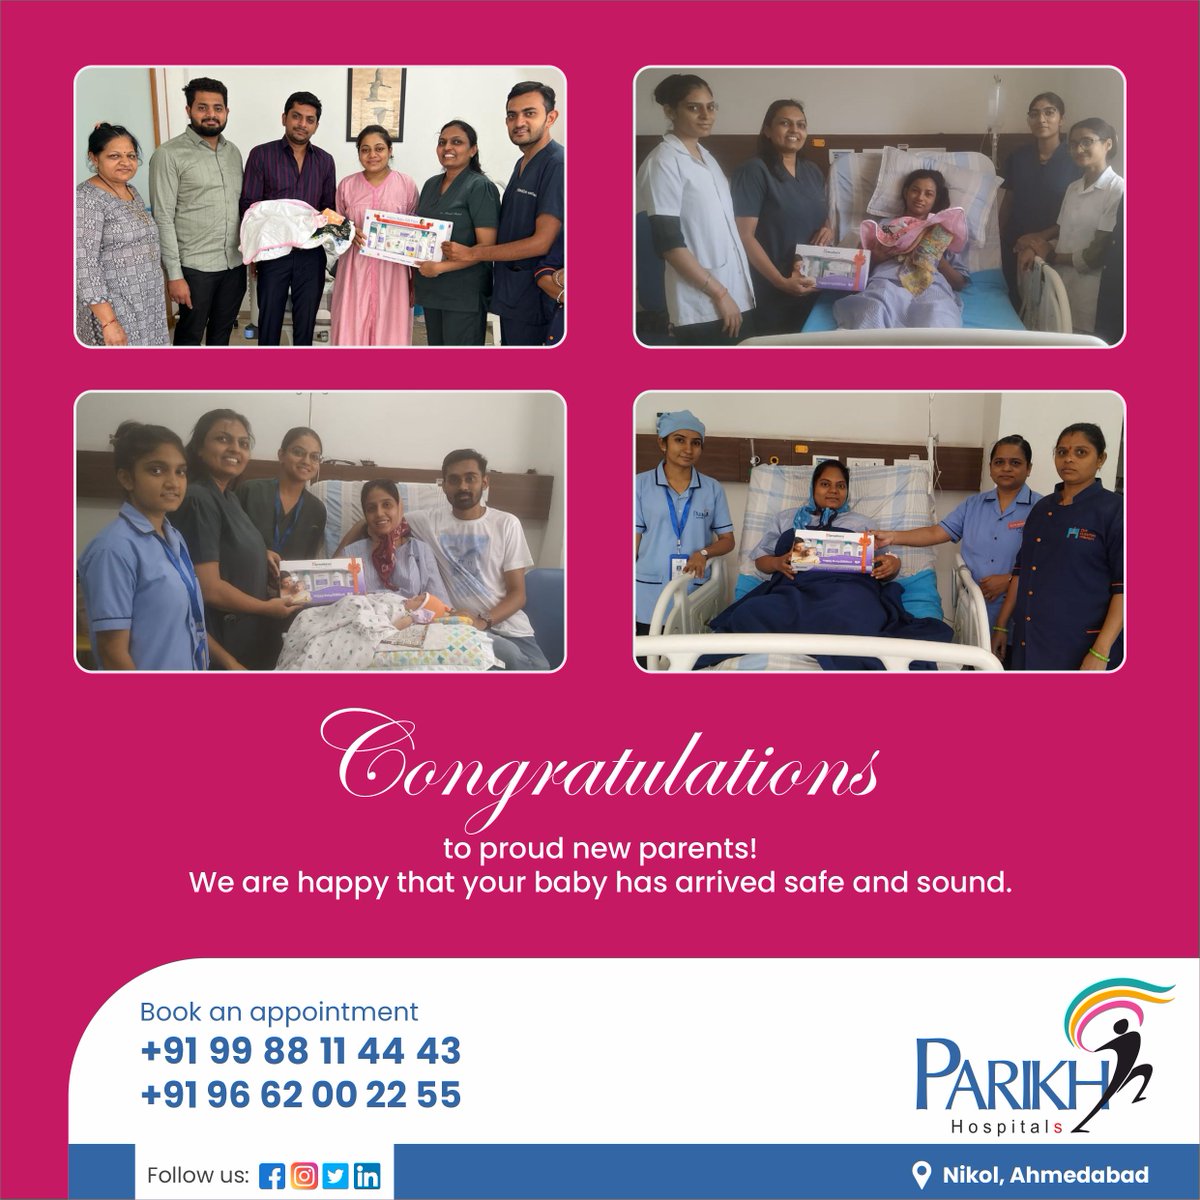 Congratulations to proud new parents ! We are happy that your baby as arrived safe and sound Book an appointment +91 99 88 11 44 33 / +91 96 62 00 22 55 #ParikhHospitals #nikol #congratulations #congratulation #safedelivery #safepregnancy #baby #healthybaby #pregnancycare